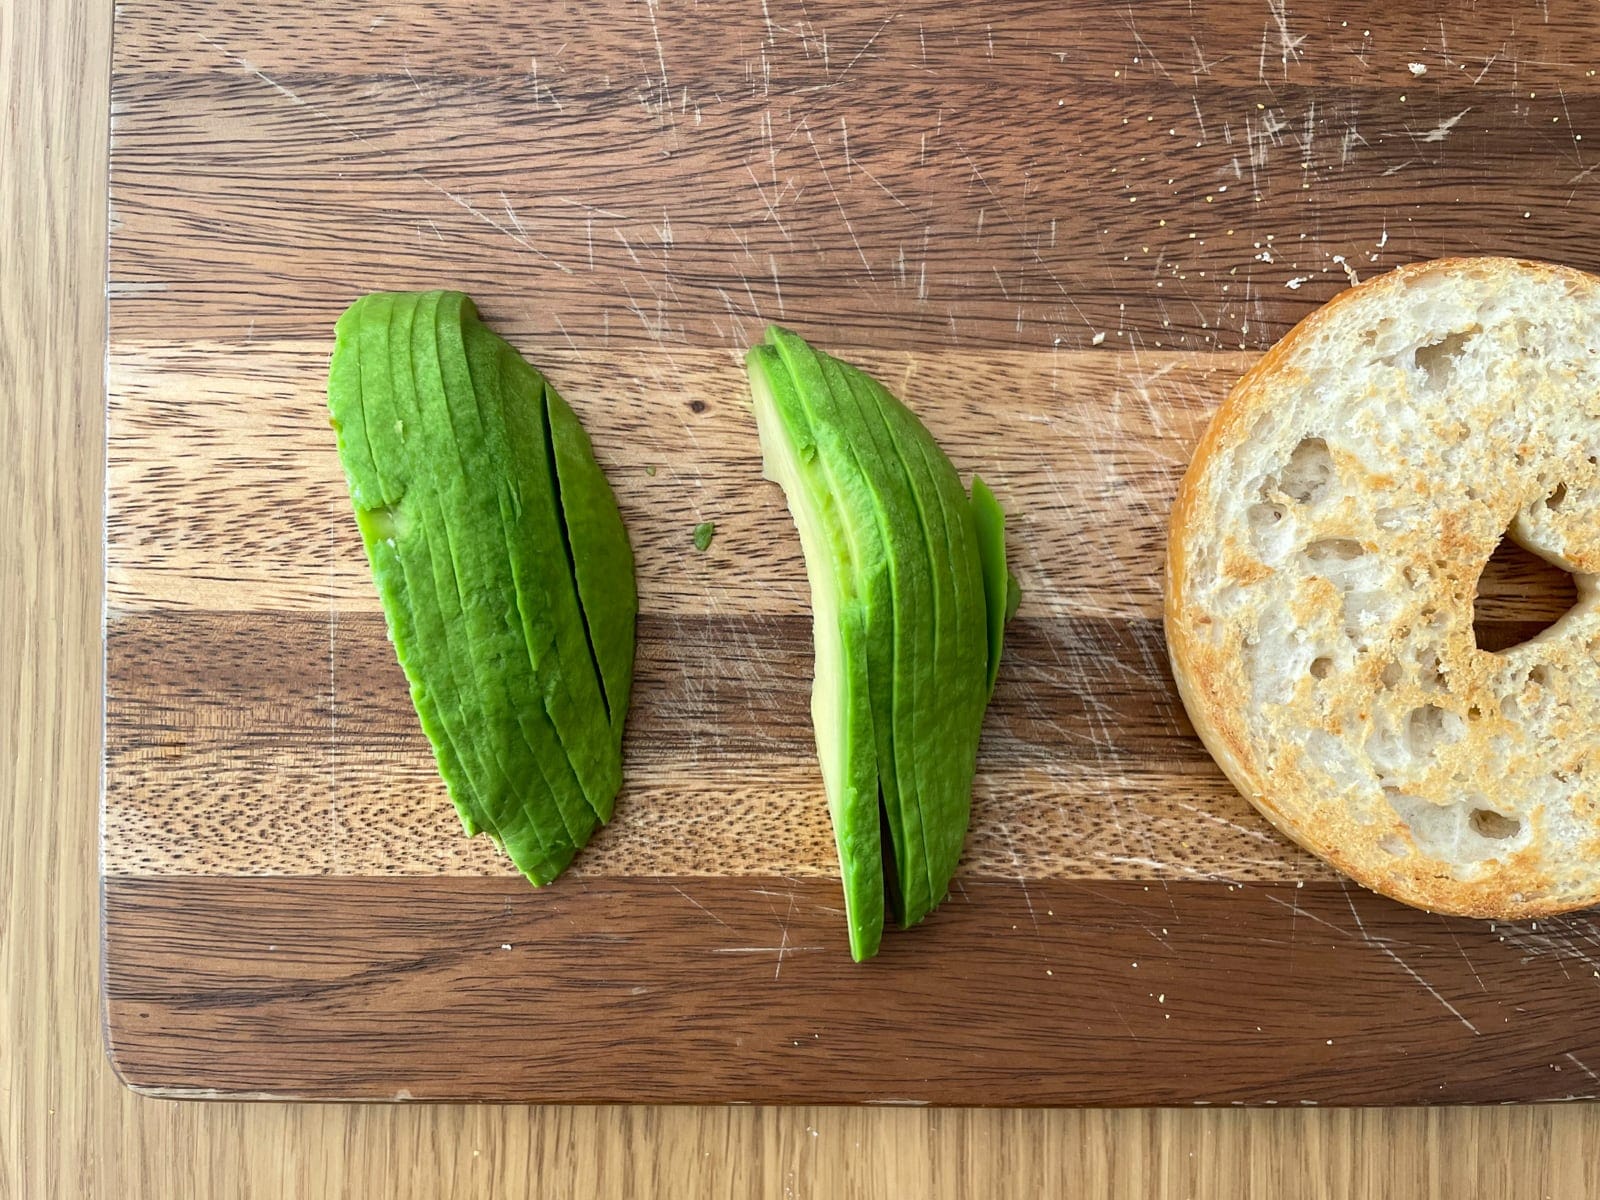 A close-up photo of two peeled and sliced avocado quarters, sitting on a wooden chopping board next to an open half of a bagel